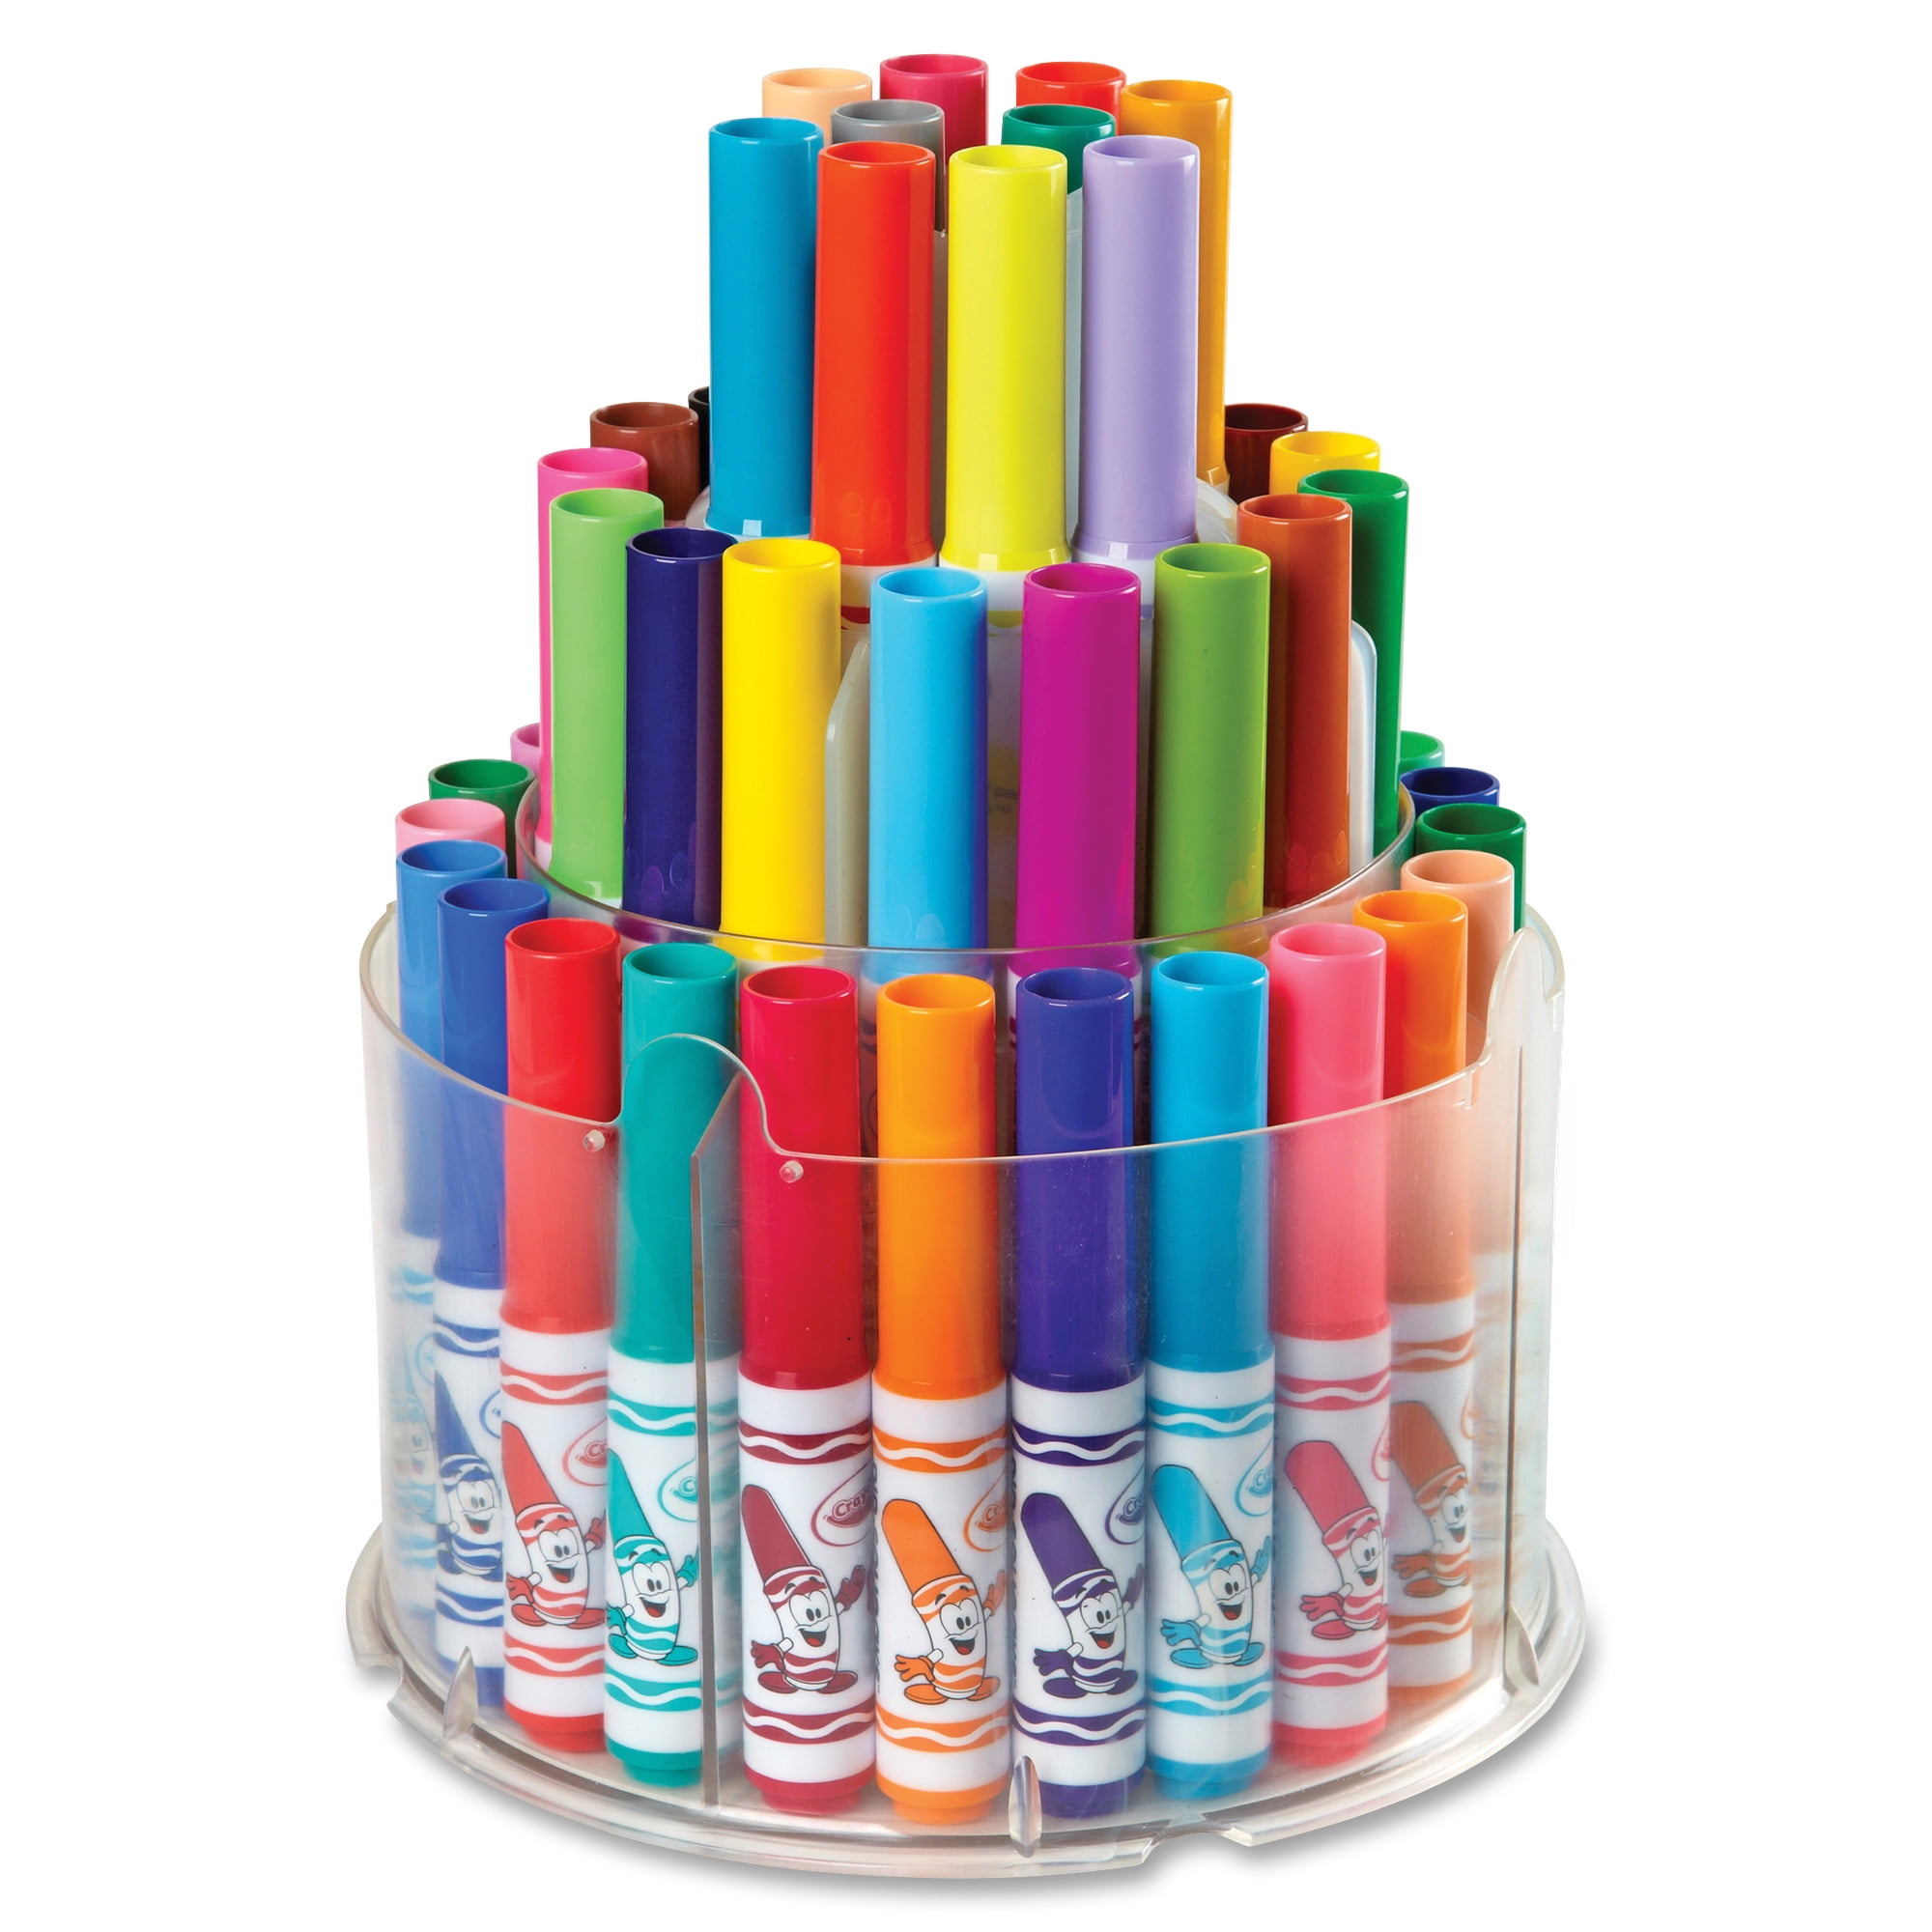 Crayola Pip-Squeaks Telescoping Marker Tower, Assorted Colors, 50 Count 